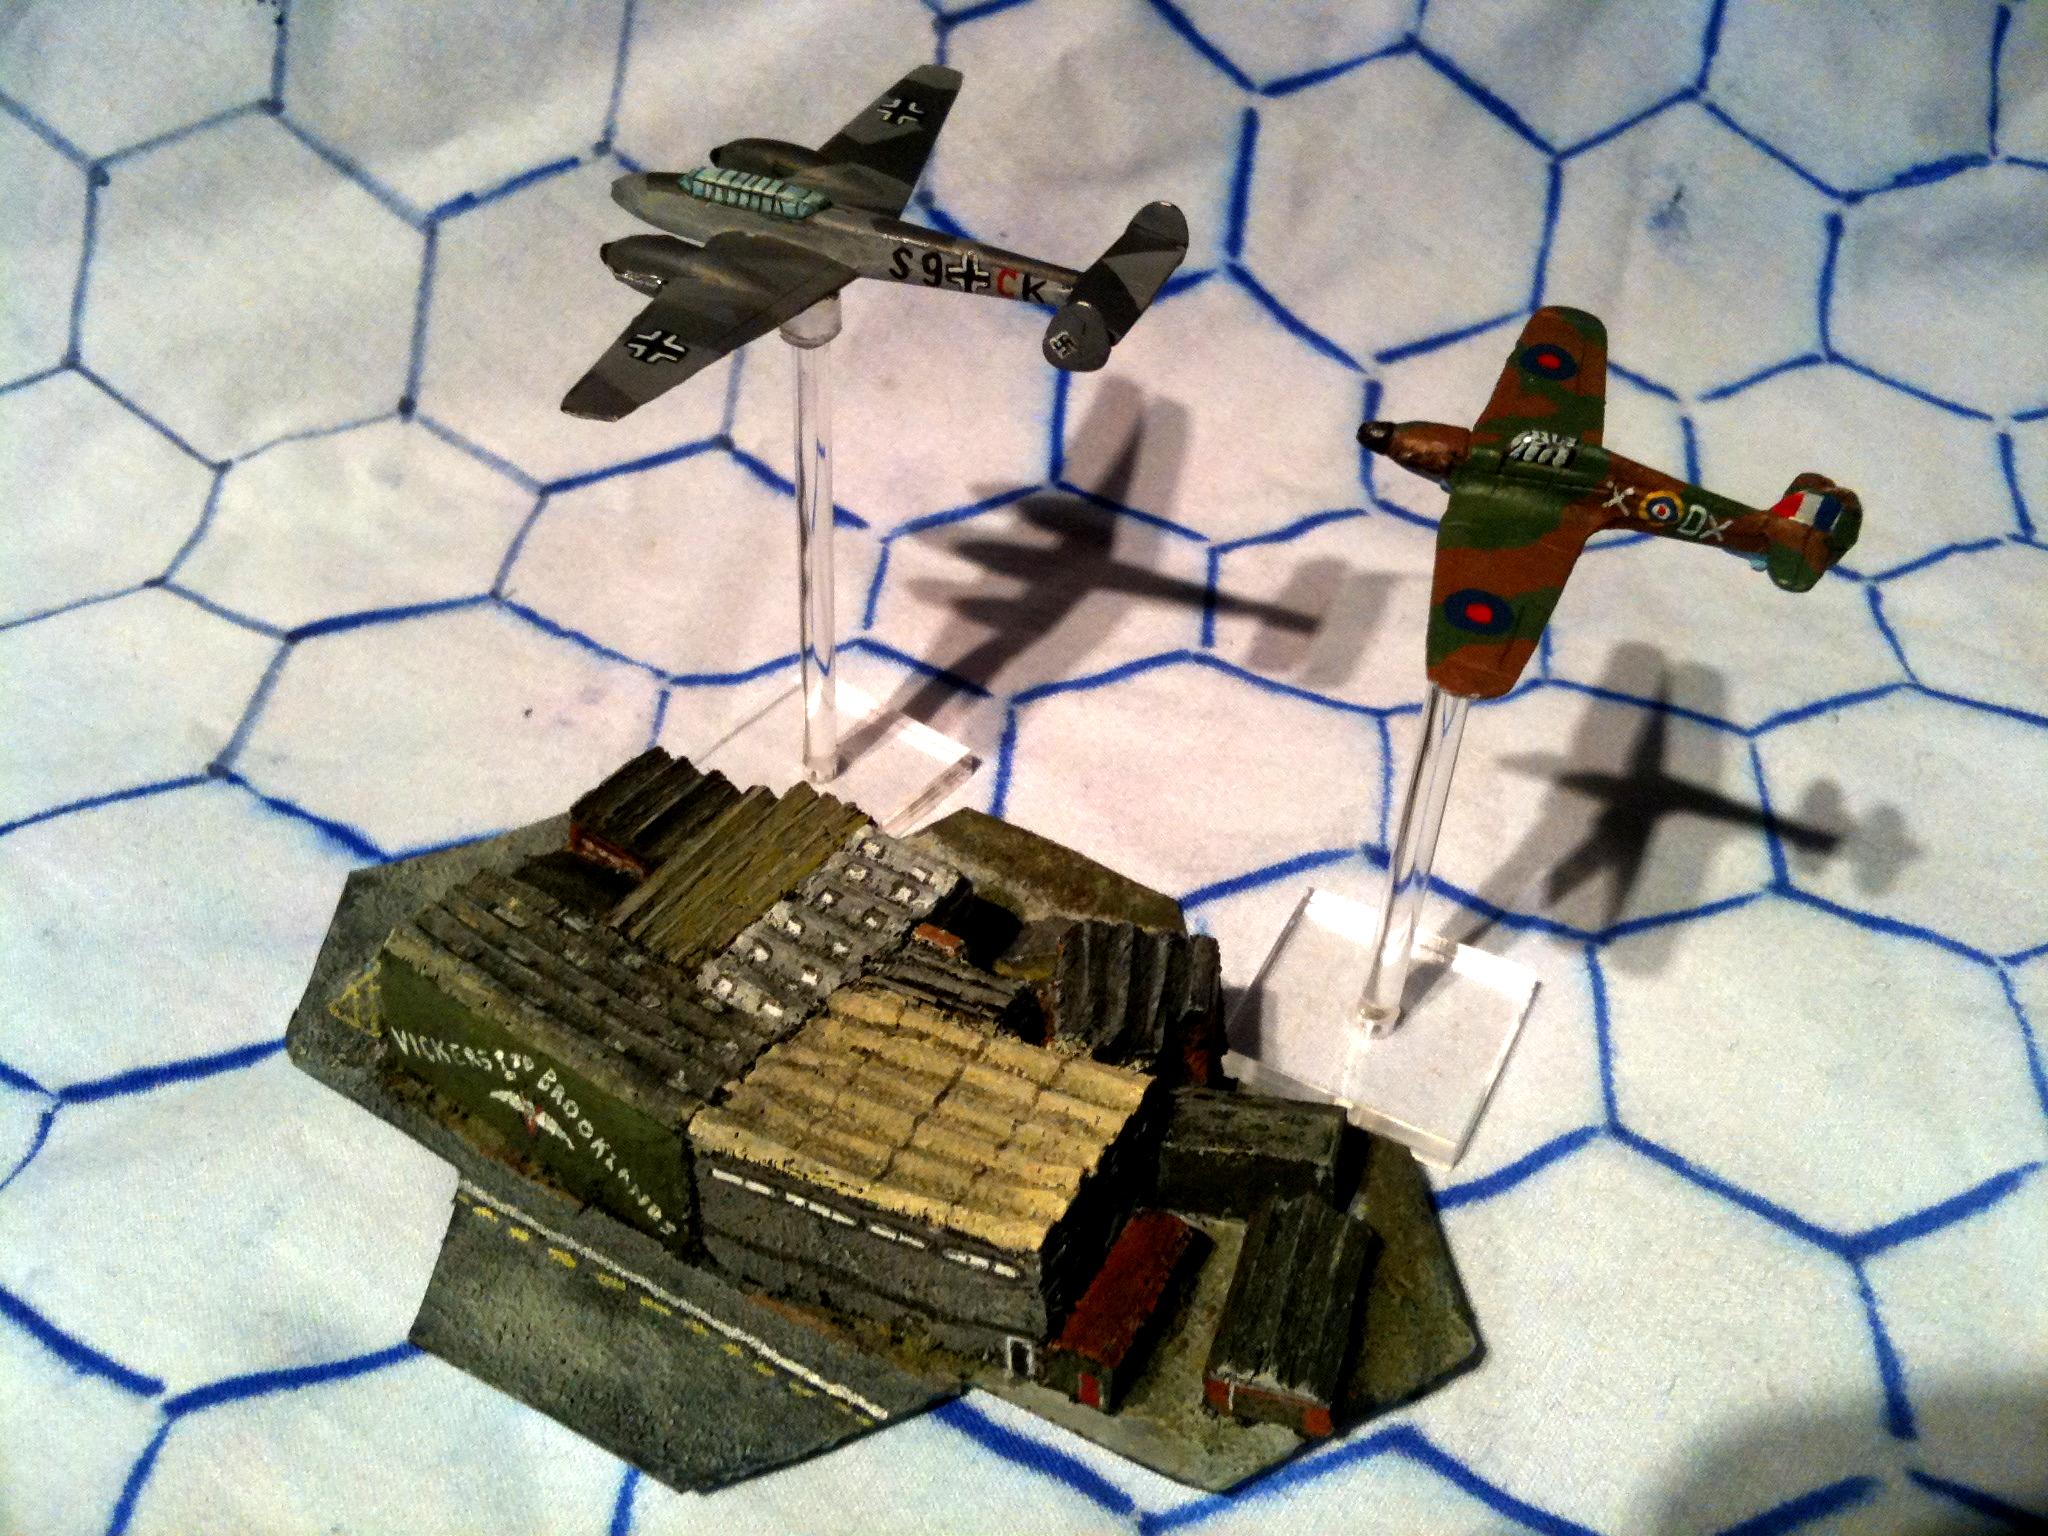 1:300, 6mm, Airborne, Aircraft, Airplane, Aviation, Check Your 6!, Fliers, Objective Marker, Planes, World War 2